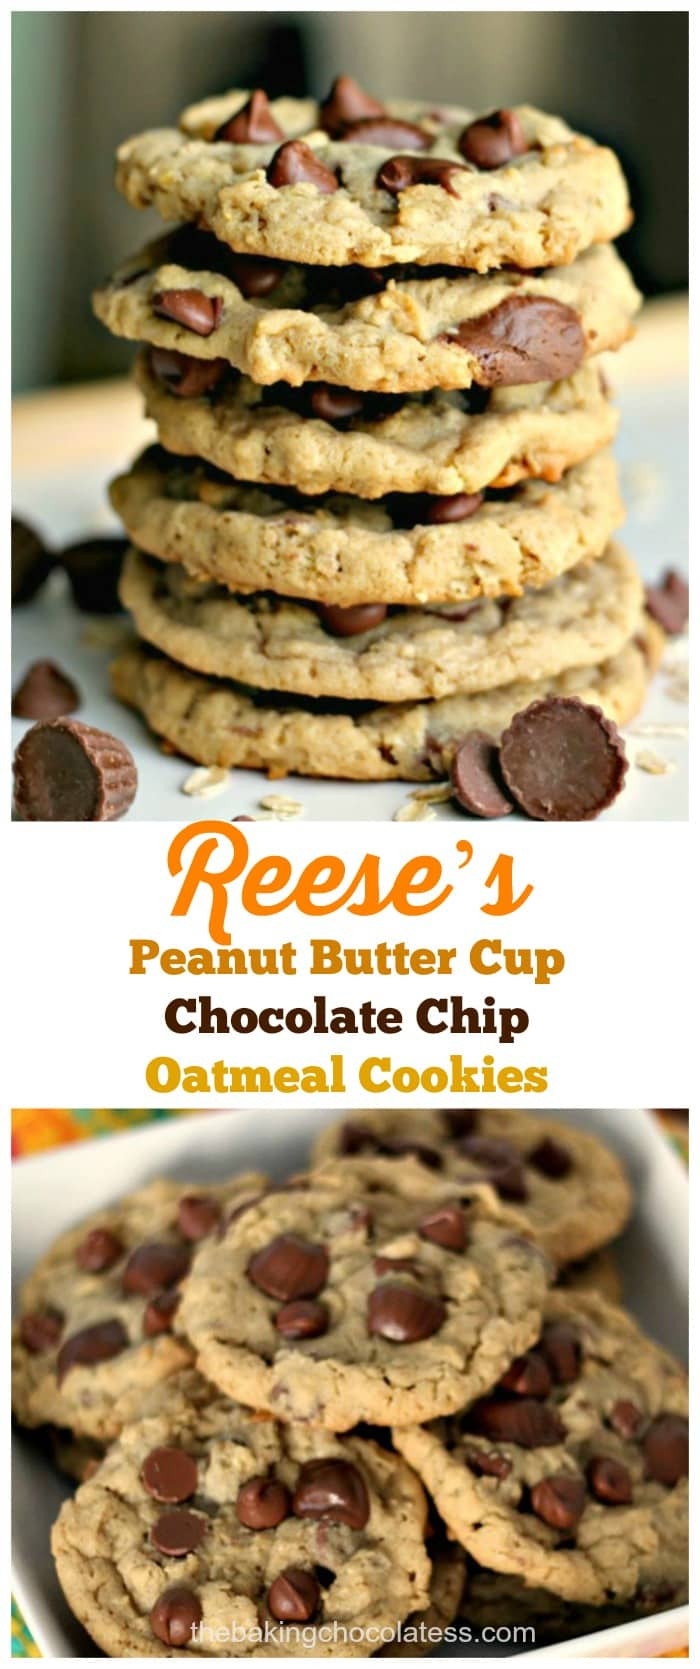 Peanut Butter Cookies With Reeses Cup
 Reese’s Peanut Butter Cup Chocolate Chip Oatmeal Cookies